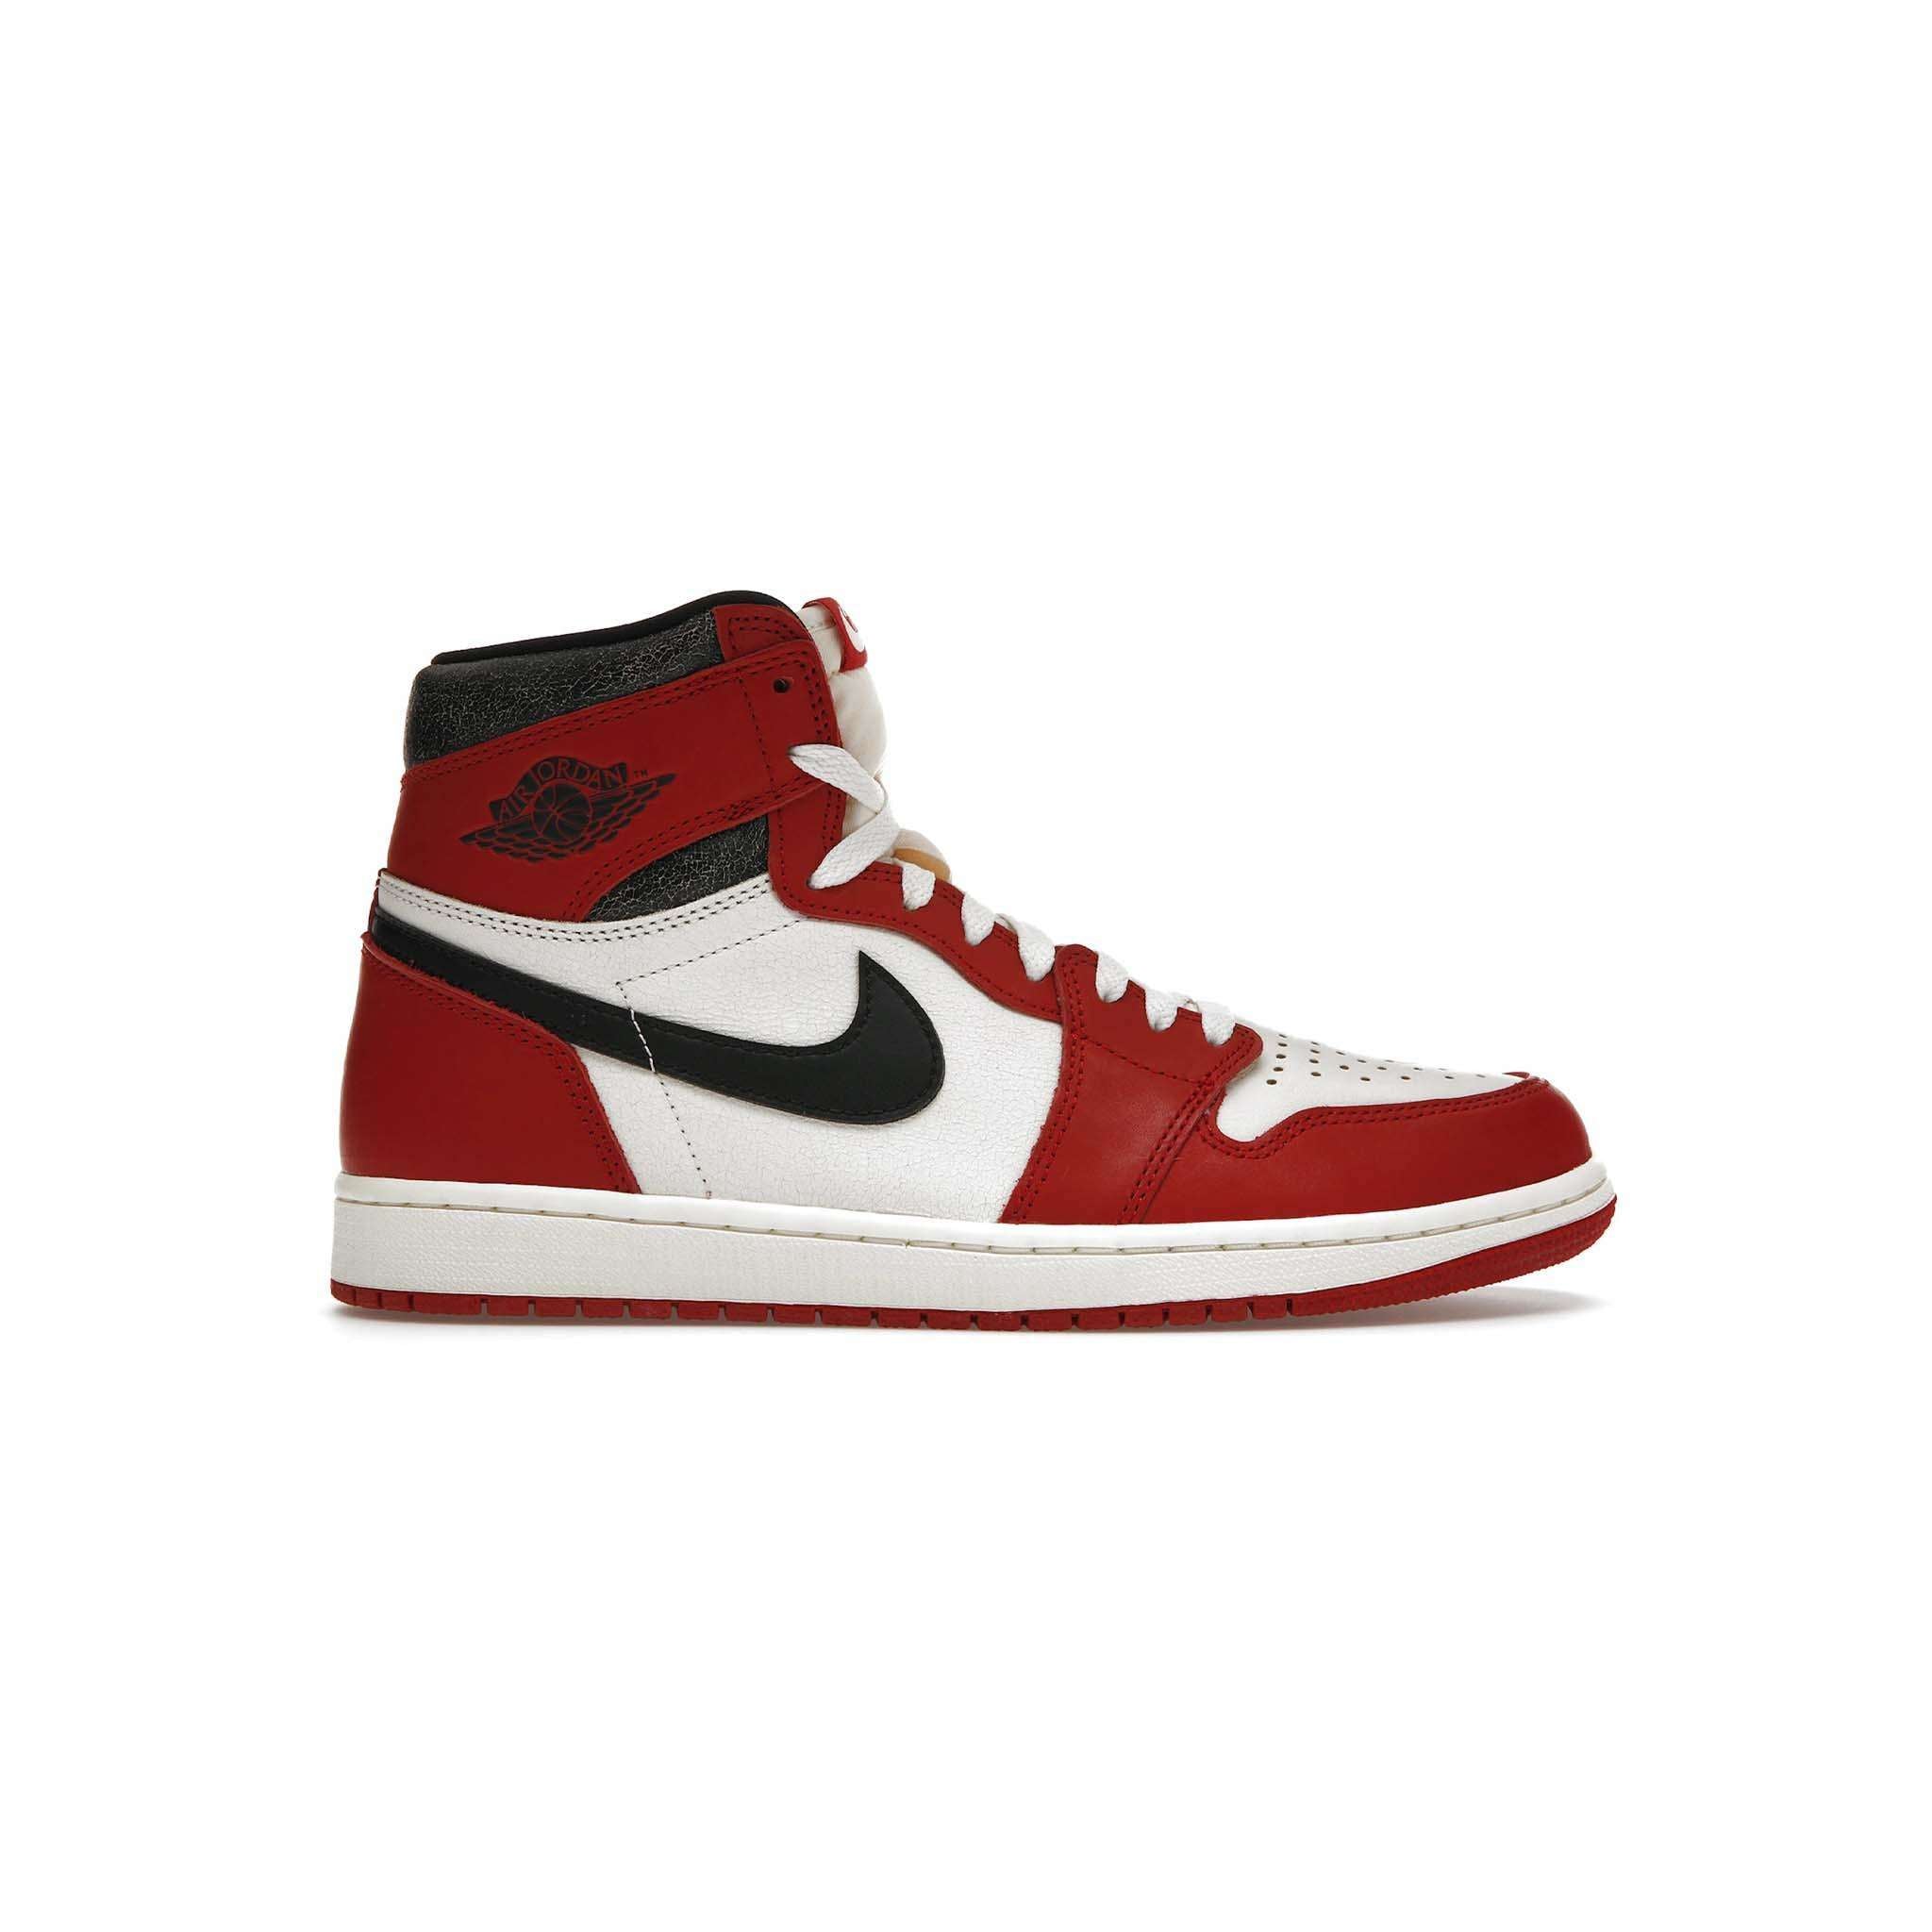 Jordan 1 Retro High OG Lost and Found – Common Hype